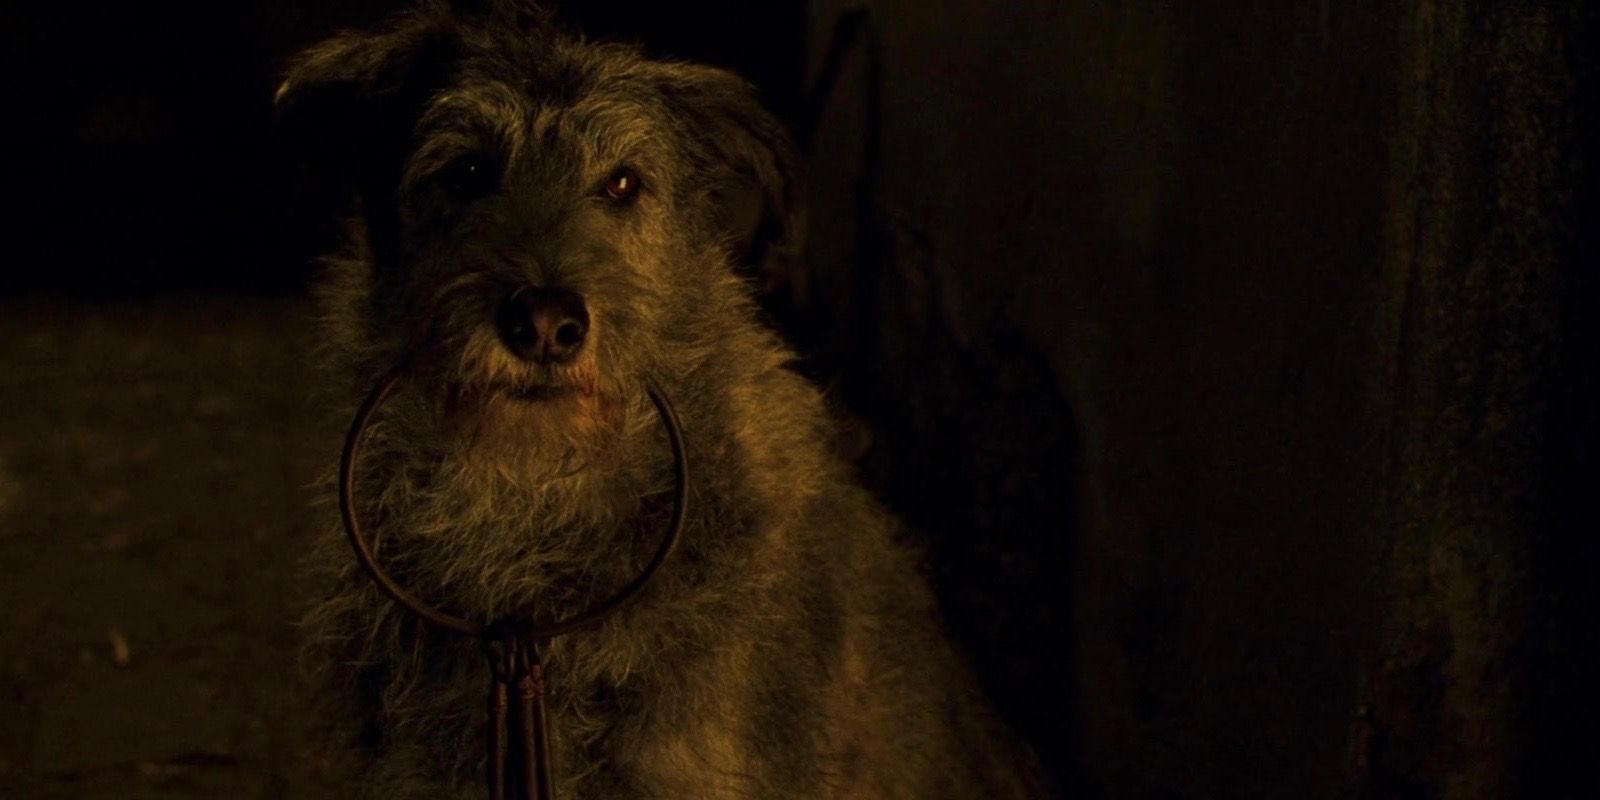 The dog holding the keys in The Pirates of the Caribbean